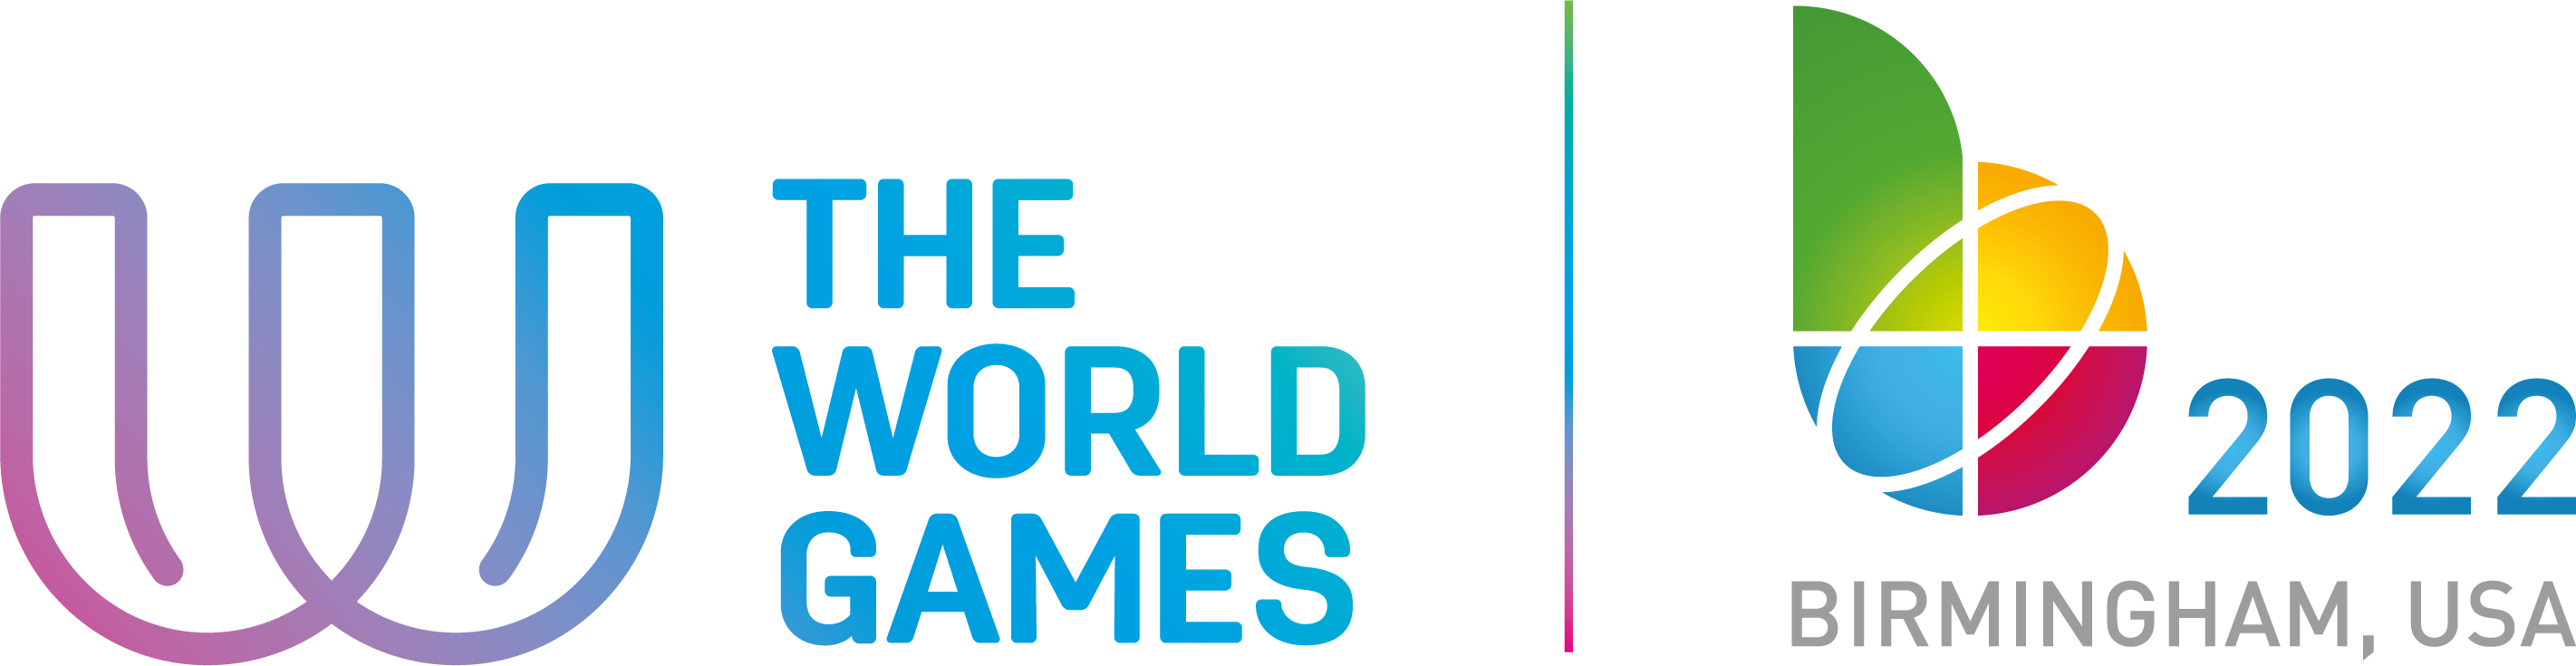 the general world games logo and the Birmingham 2022 logo